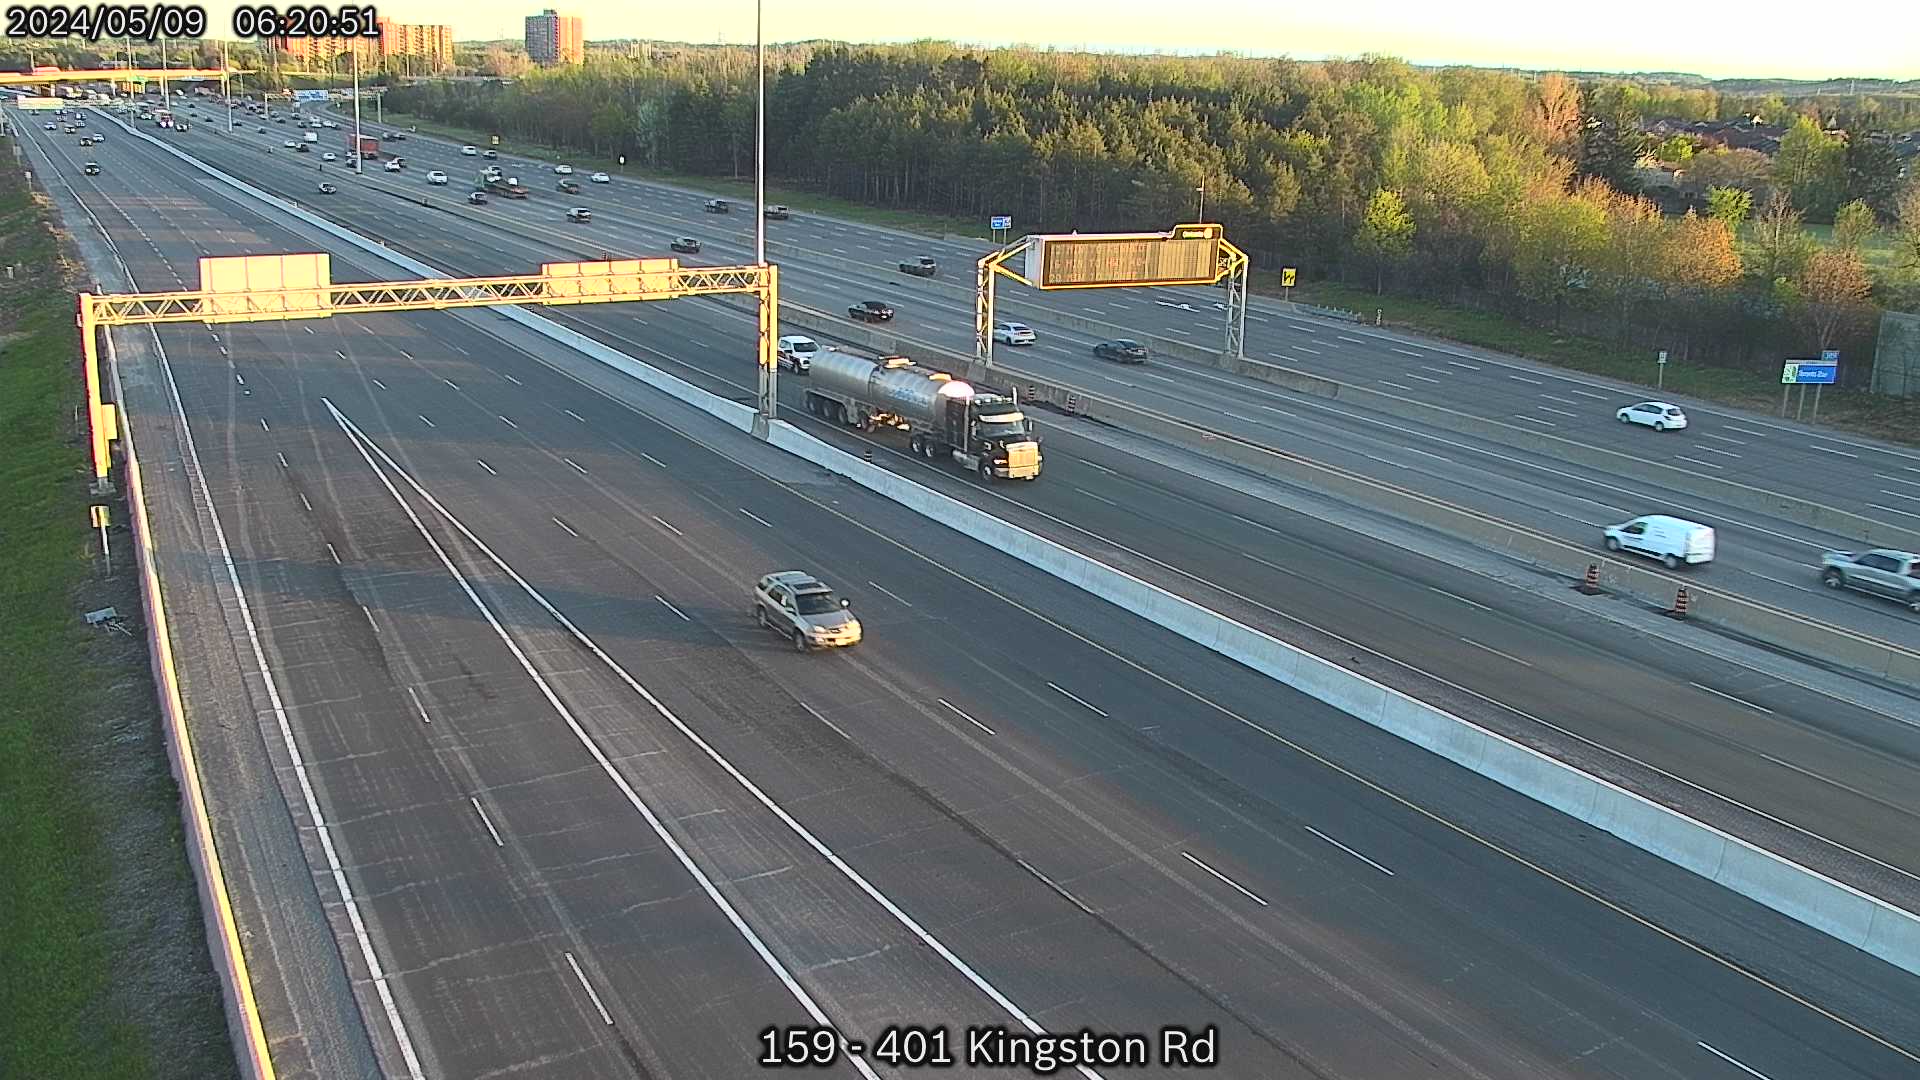 Webcam of South side of Highway 401 near Kingston Rd courtesy of the MTO